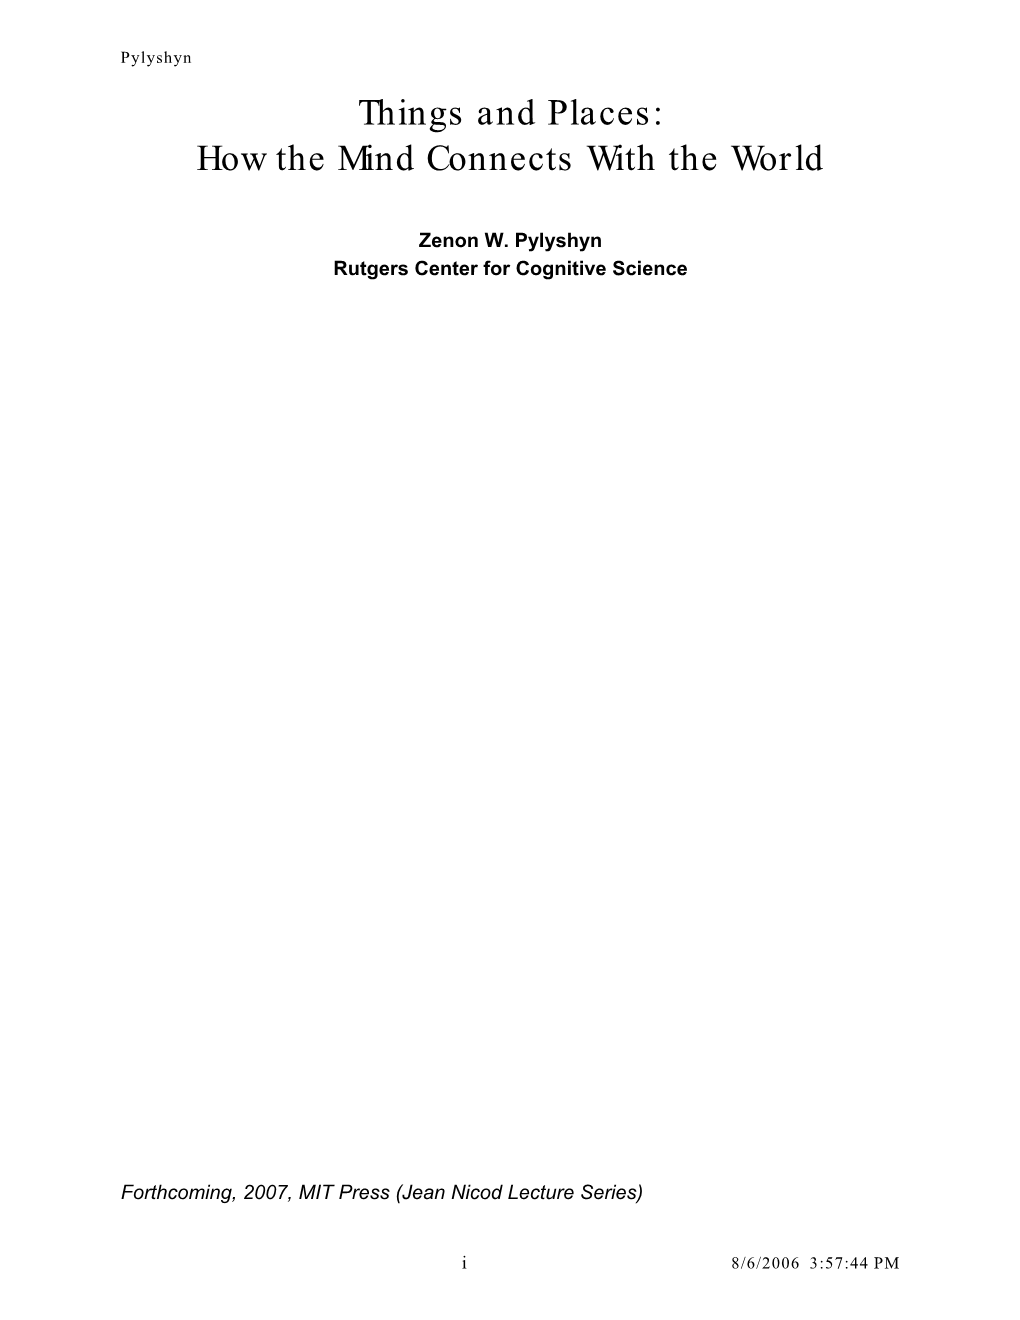 Things and Places: How the Mind Connects with the World